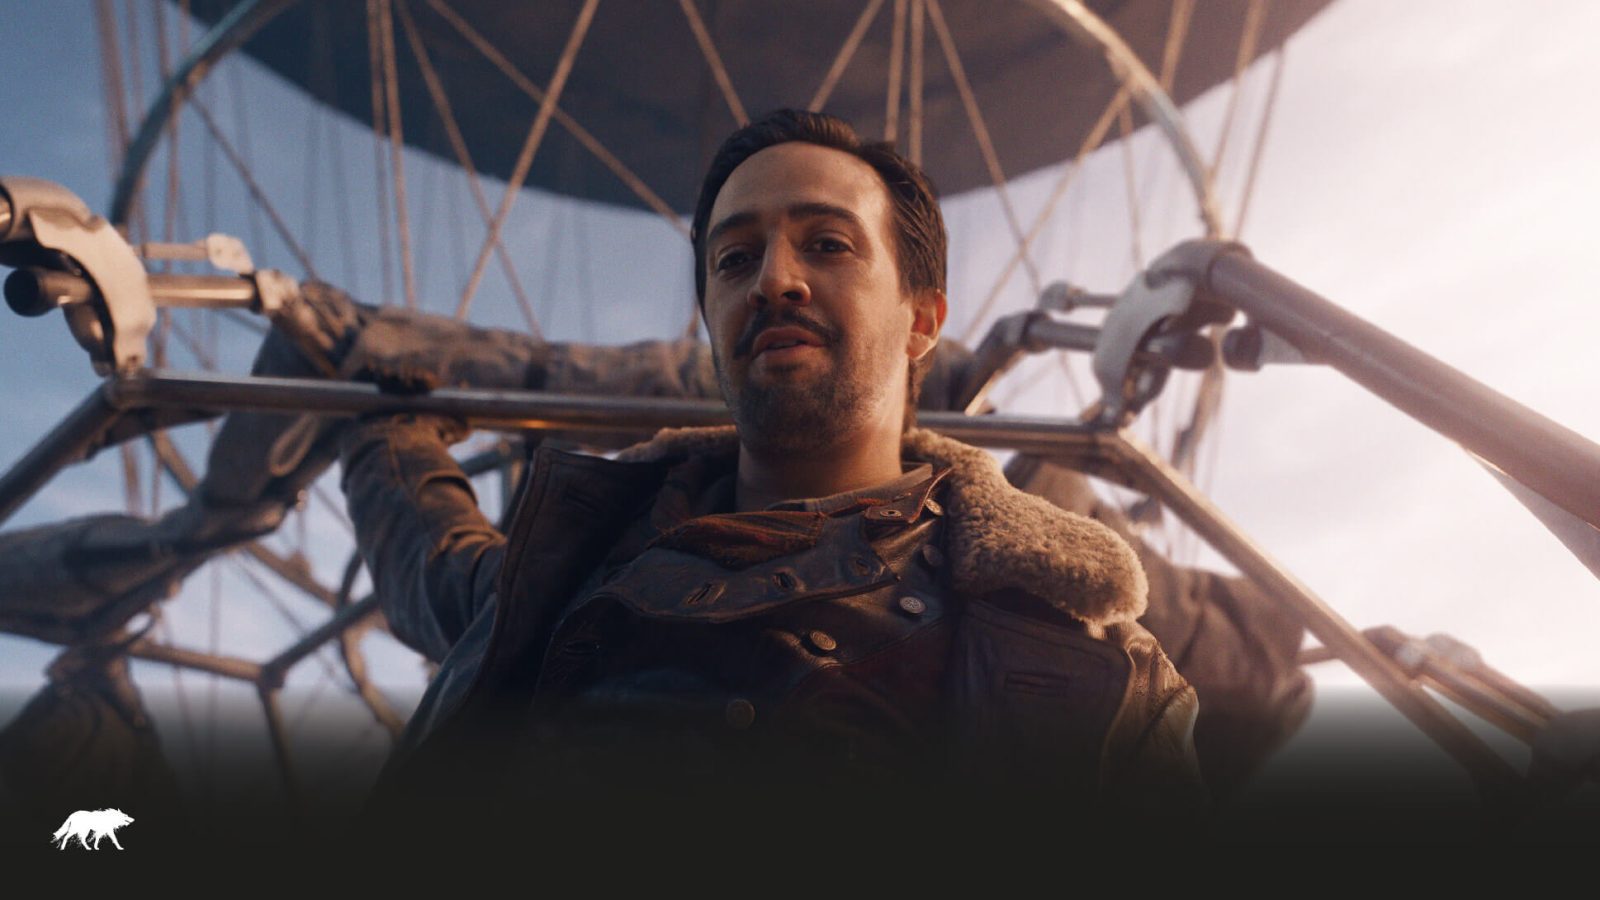 A man with a light beard wearing a leather jacket stands in front of a large metallic structure, designed by a prominent graphic design agency, which appears to be part of a futuristic ferris wheel, under